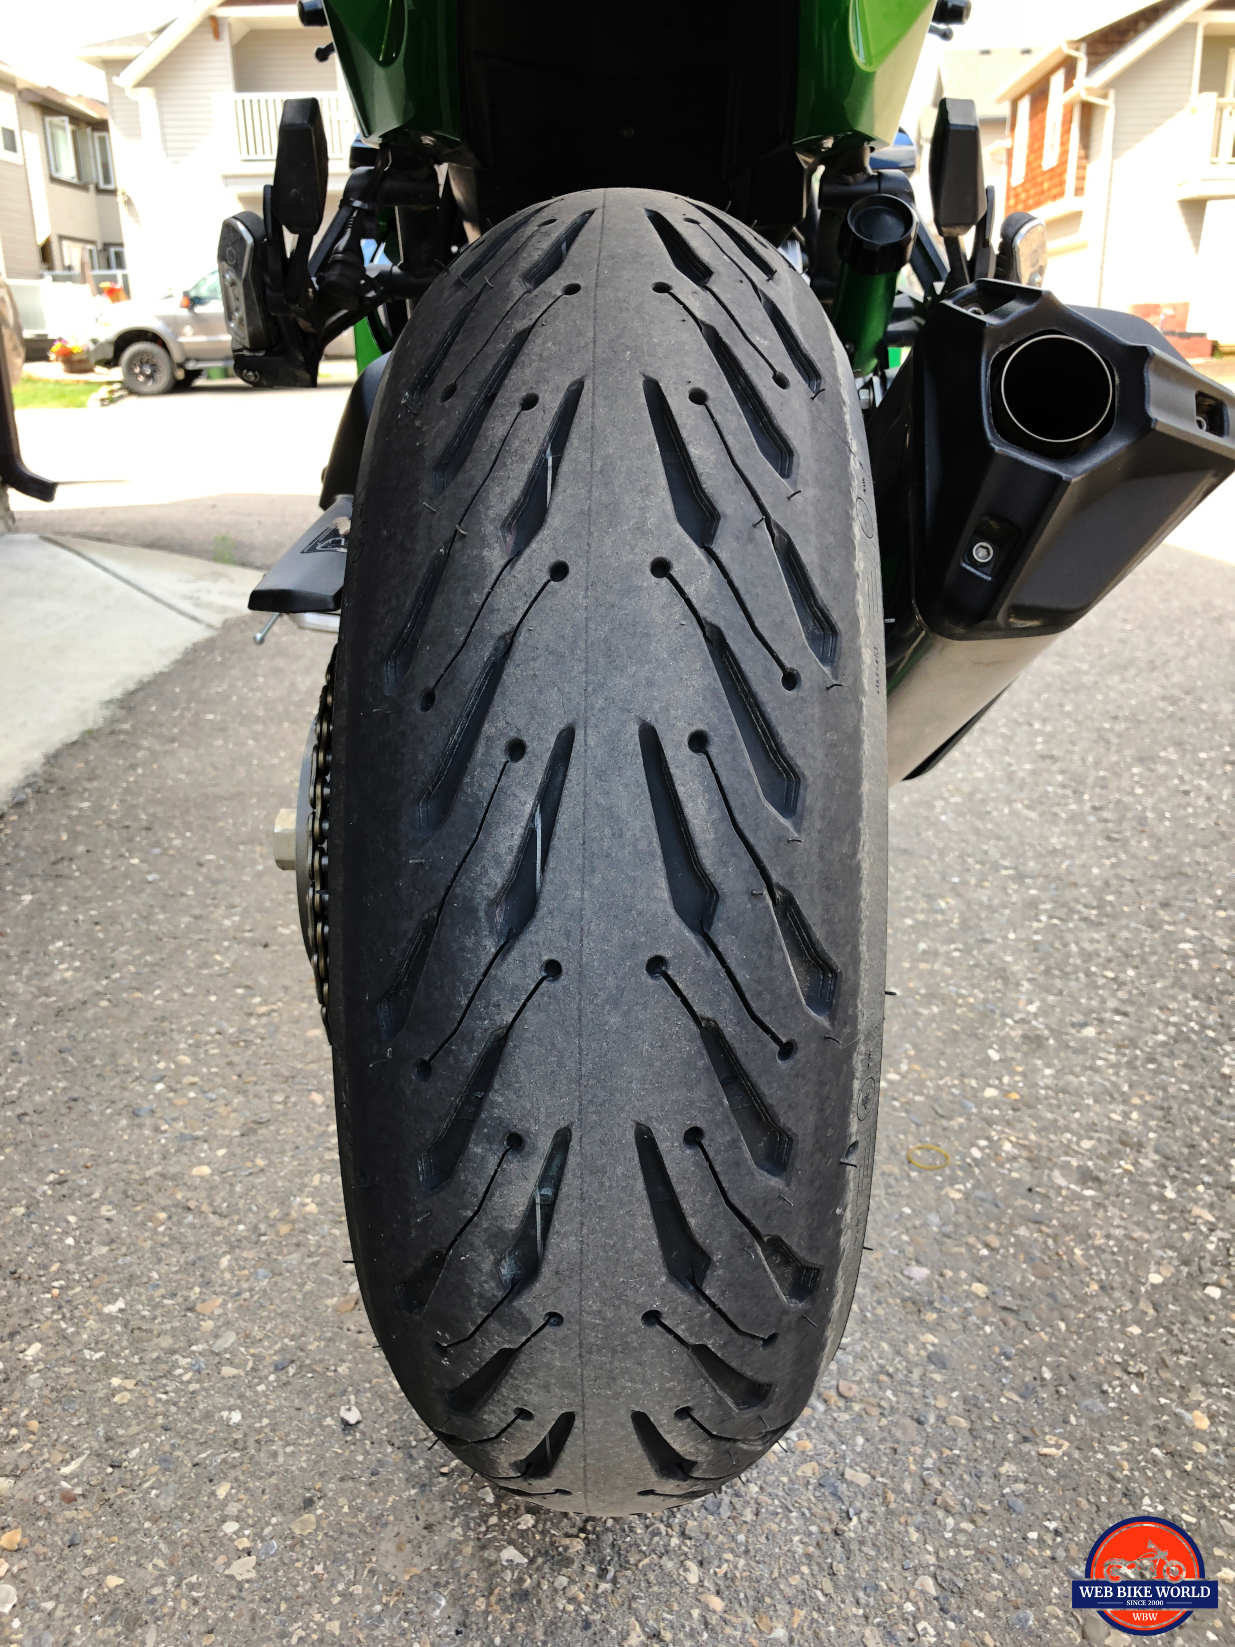 heart editorial Enroll Michelin Road 5 Tires Hands-On Review: Super Sticky & Long Lasting